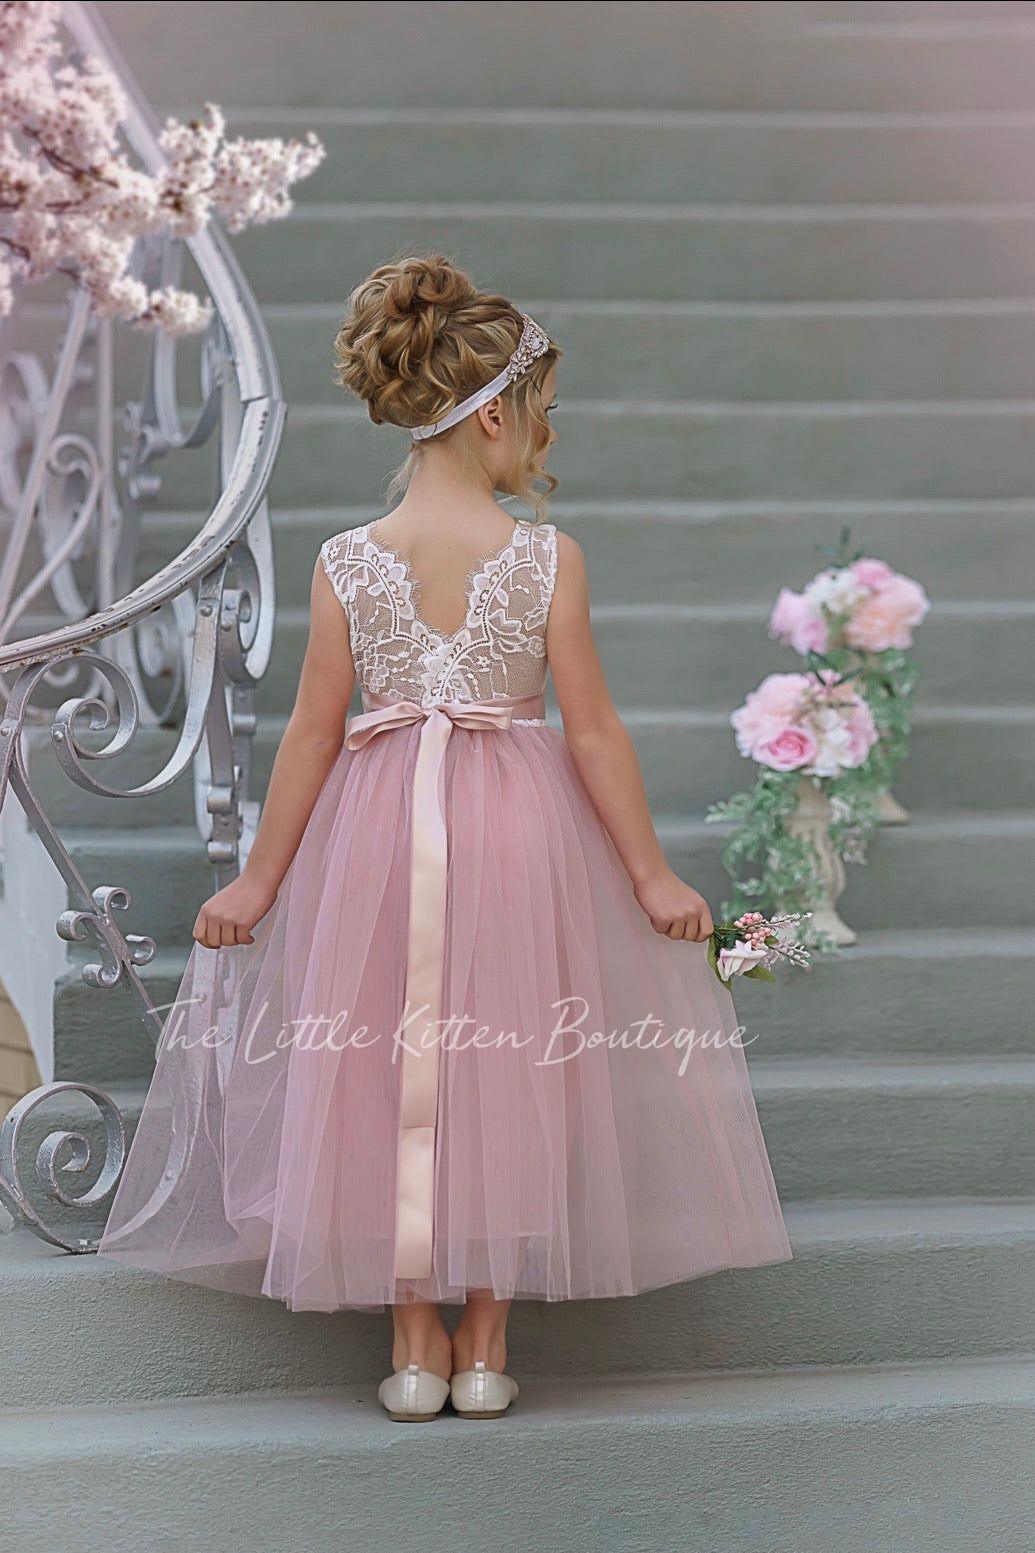 Sleeveless Lace and Tulle Flower Girl Dresses / Girls Special Occasion –  The Little Kitten Boutique